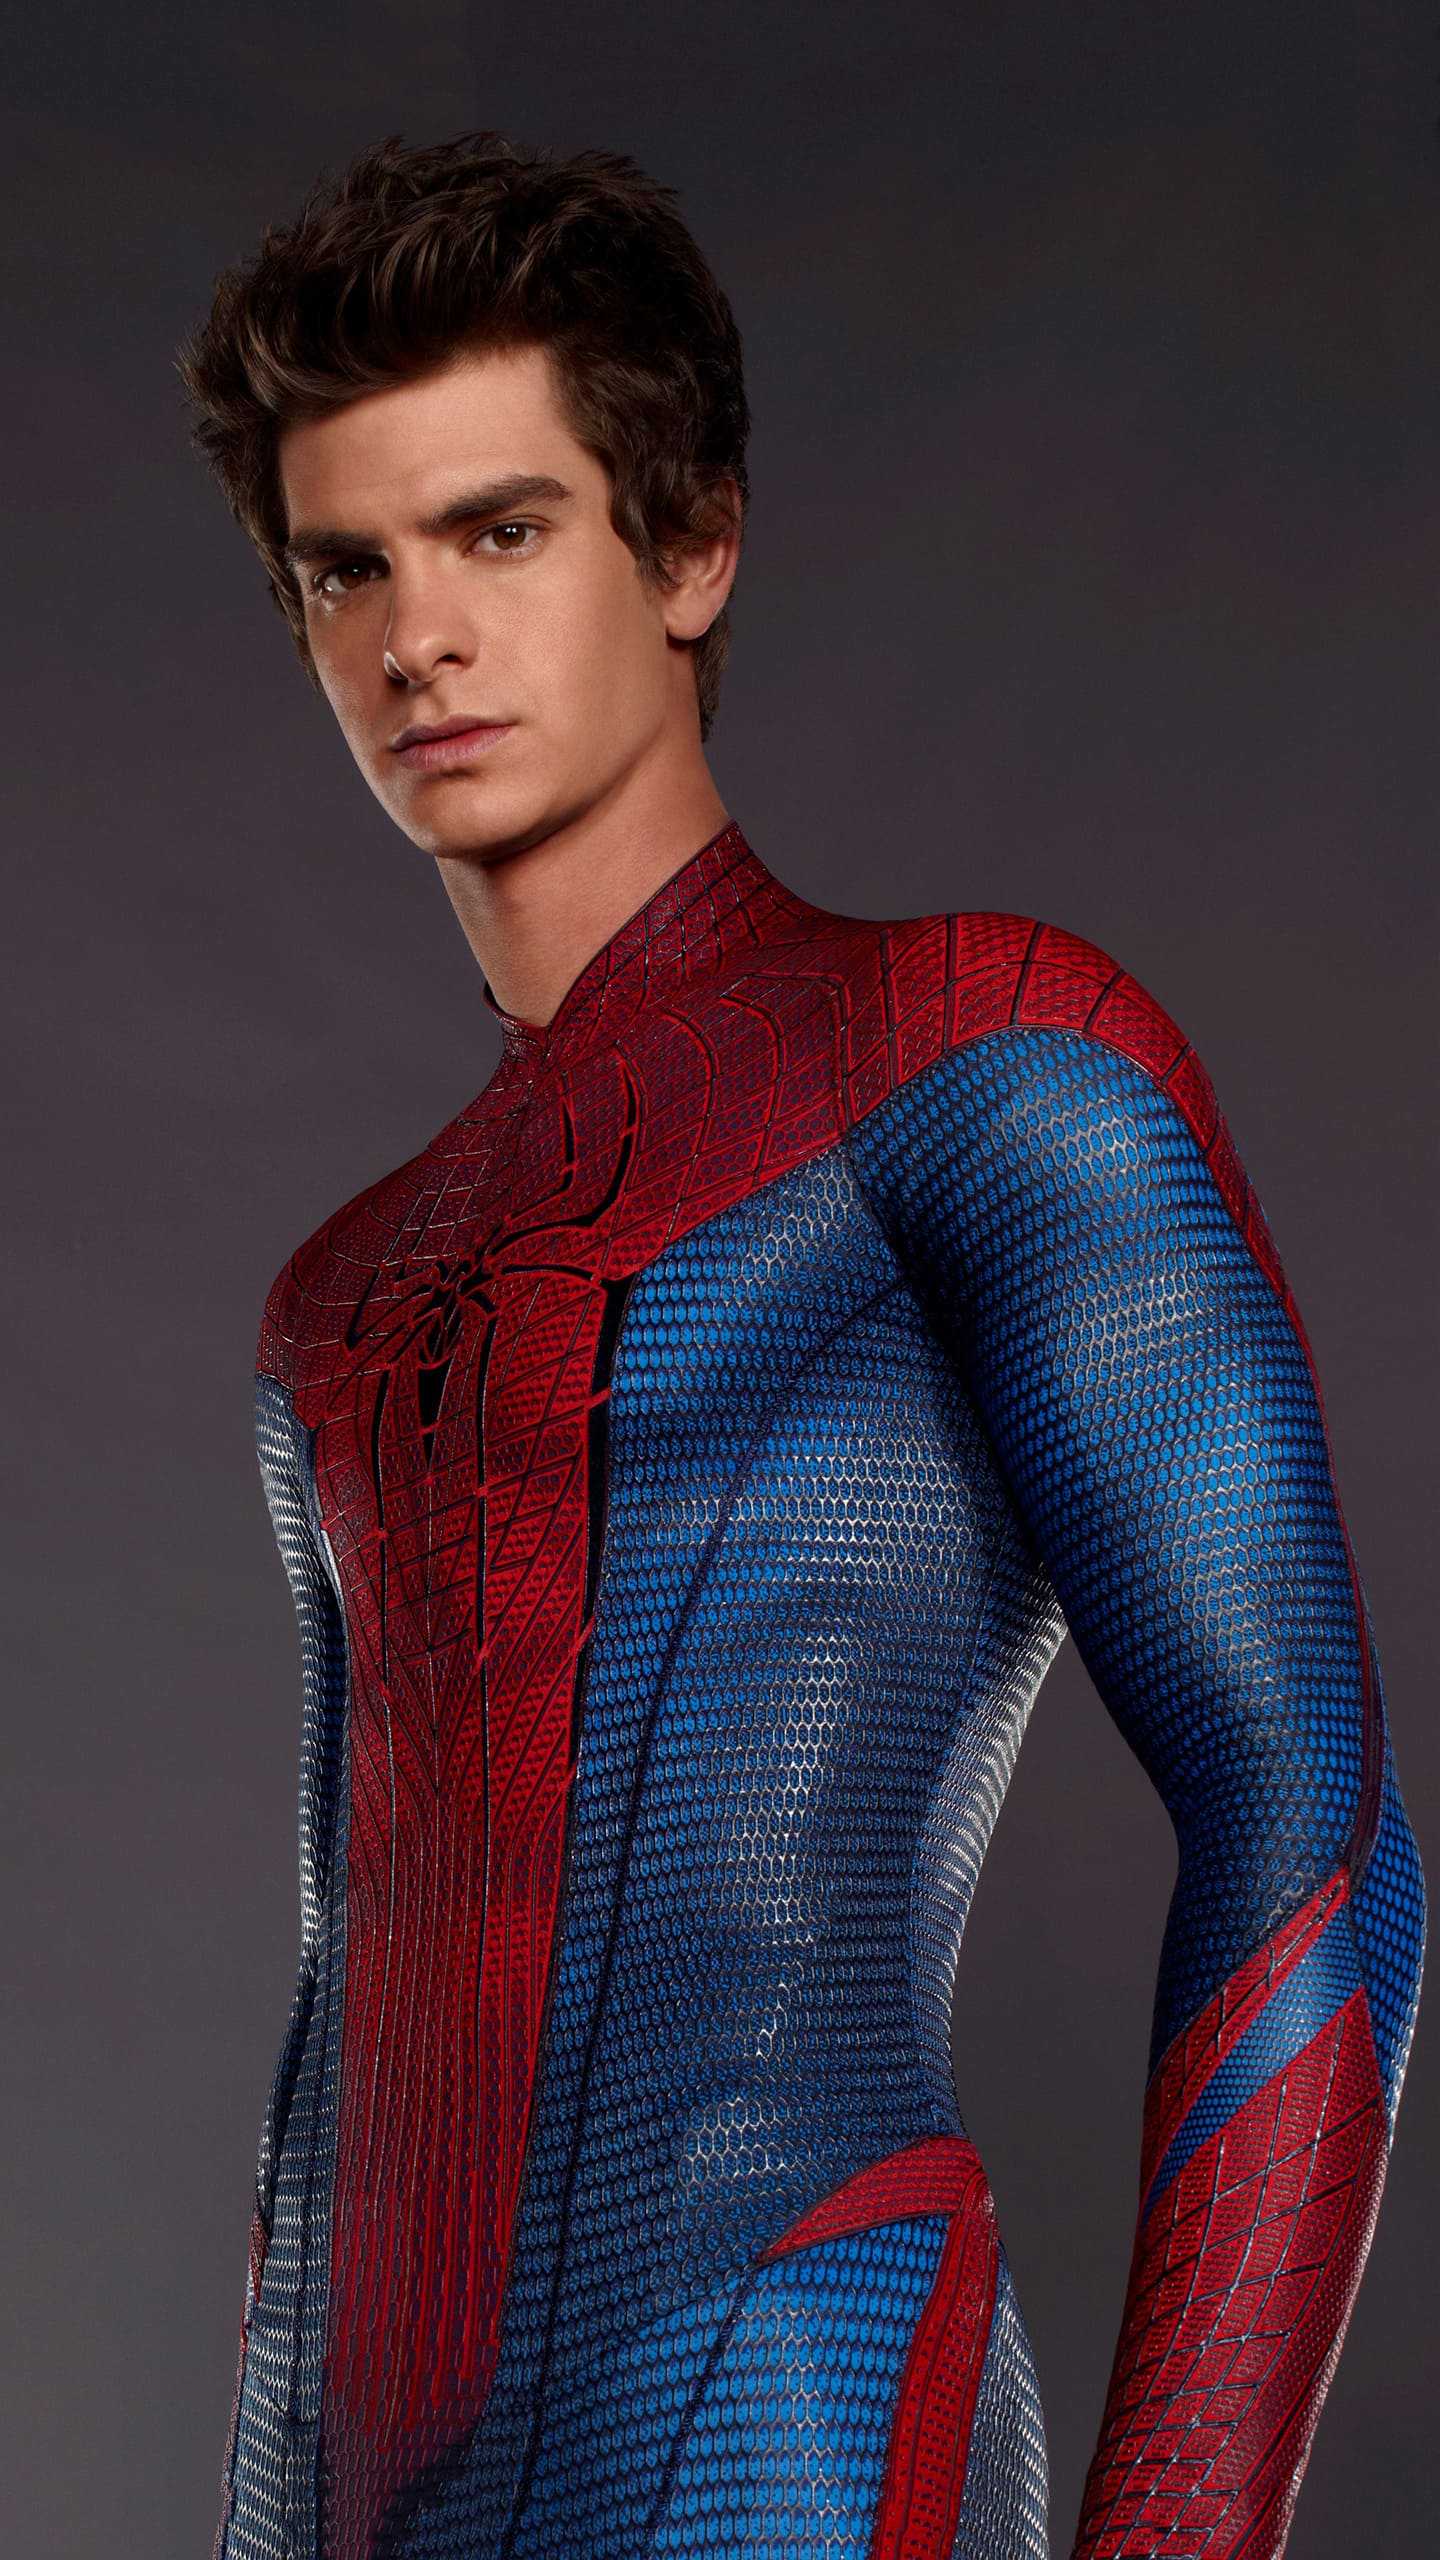 Andrew Garfield as Spider-Man in the 2012 film The Amazing Spider-Man. - Andrew Garfield